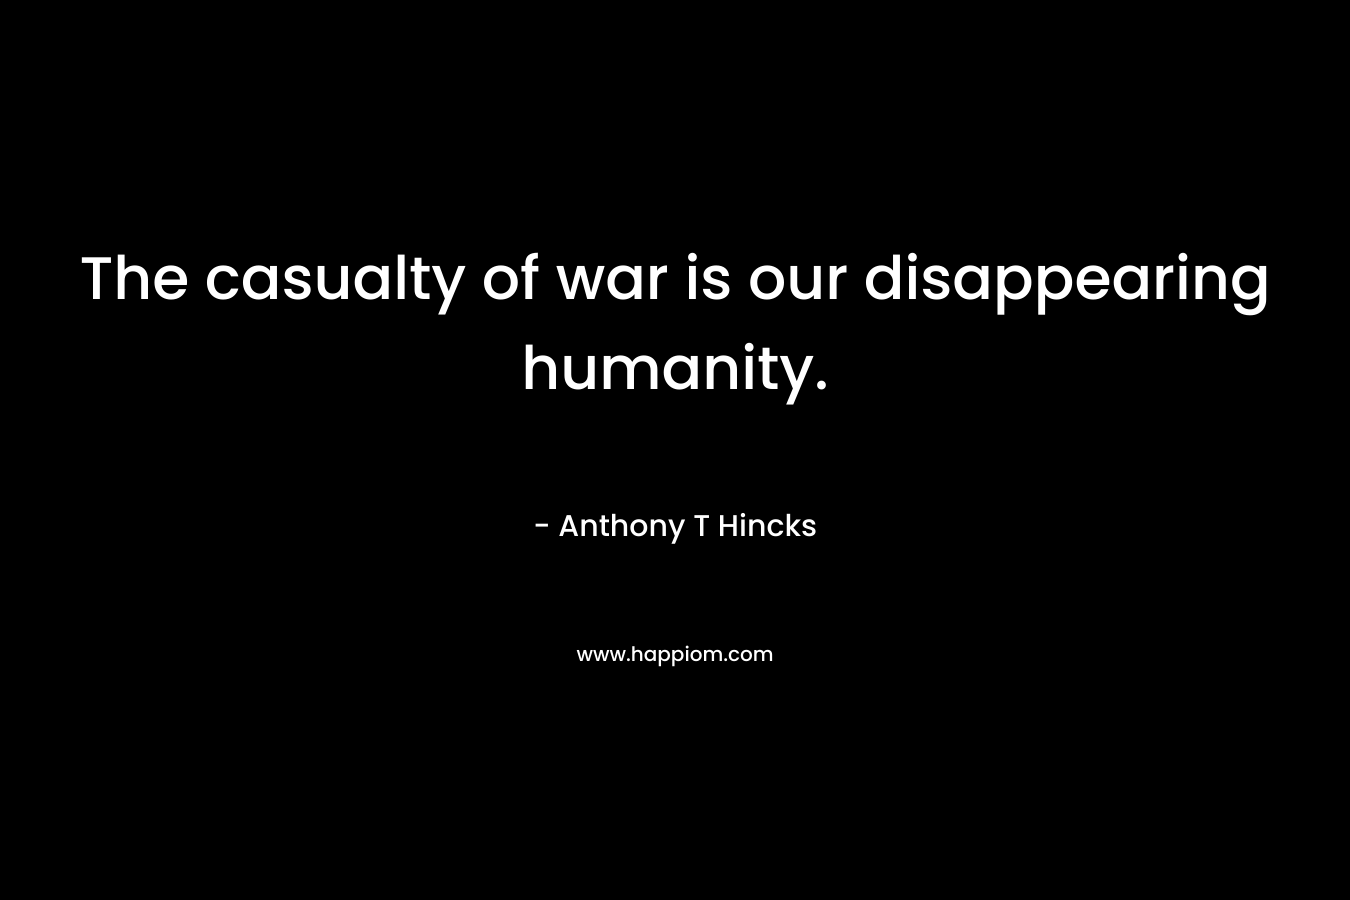 The casualty of war is our disappearing humanity. – Anthony T Hincks